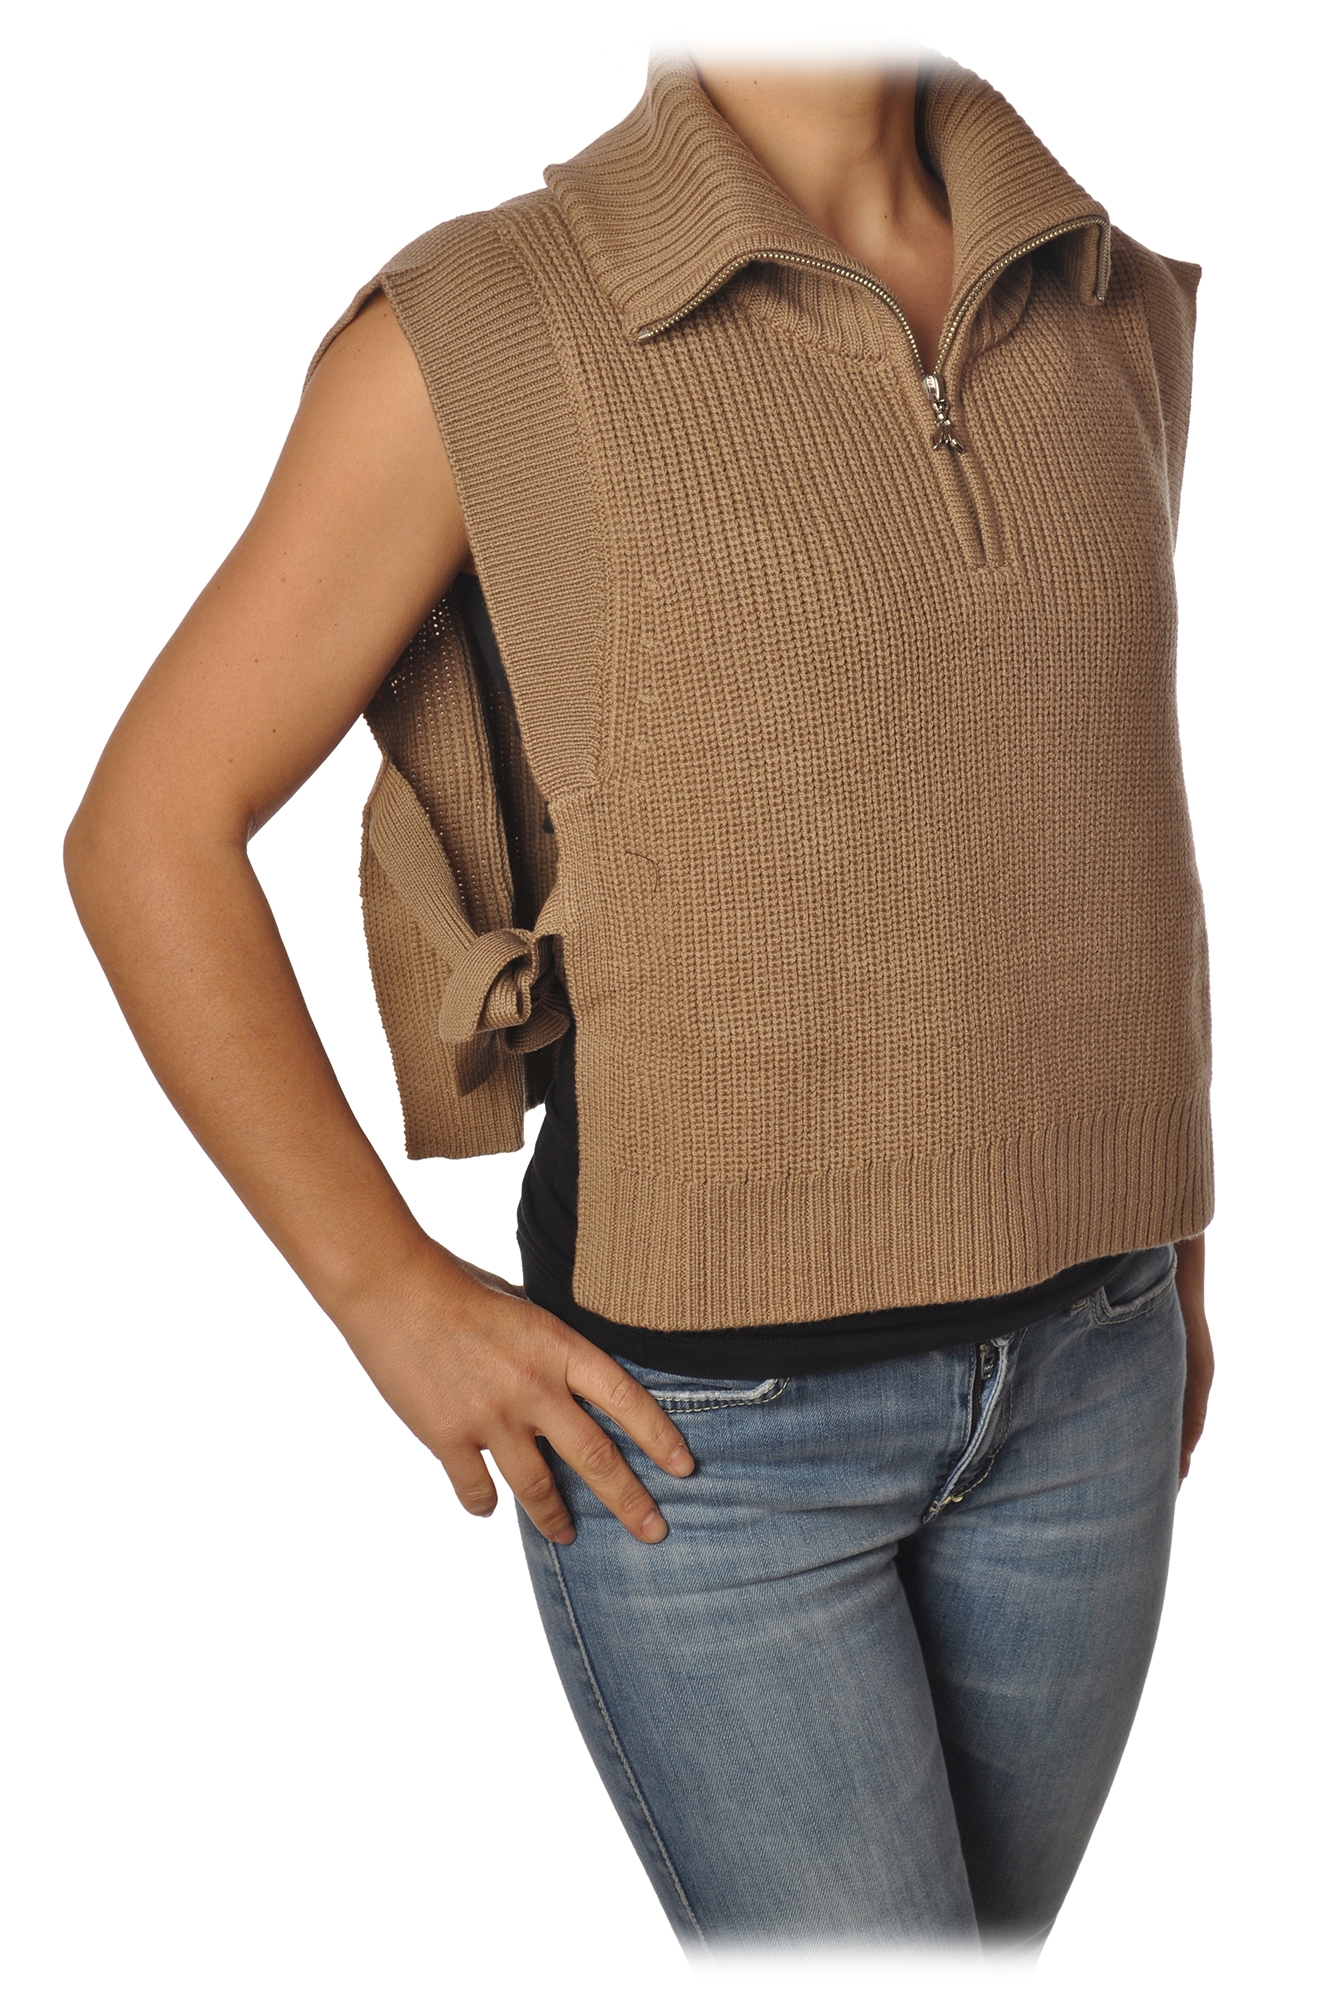 Patrizia Pepe - Vest with Zip Closure and Bow Detail - Beige - Pullover Made Italy - Luxury Exclusive Collection - Avvenice